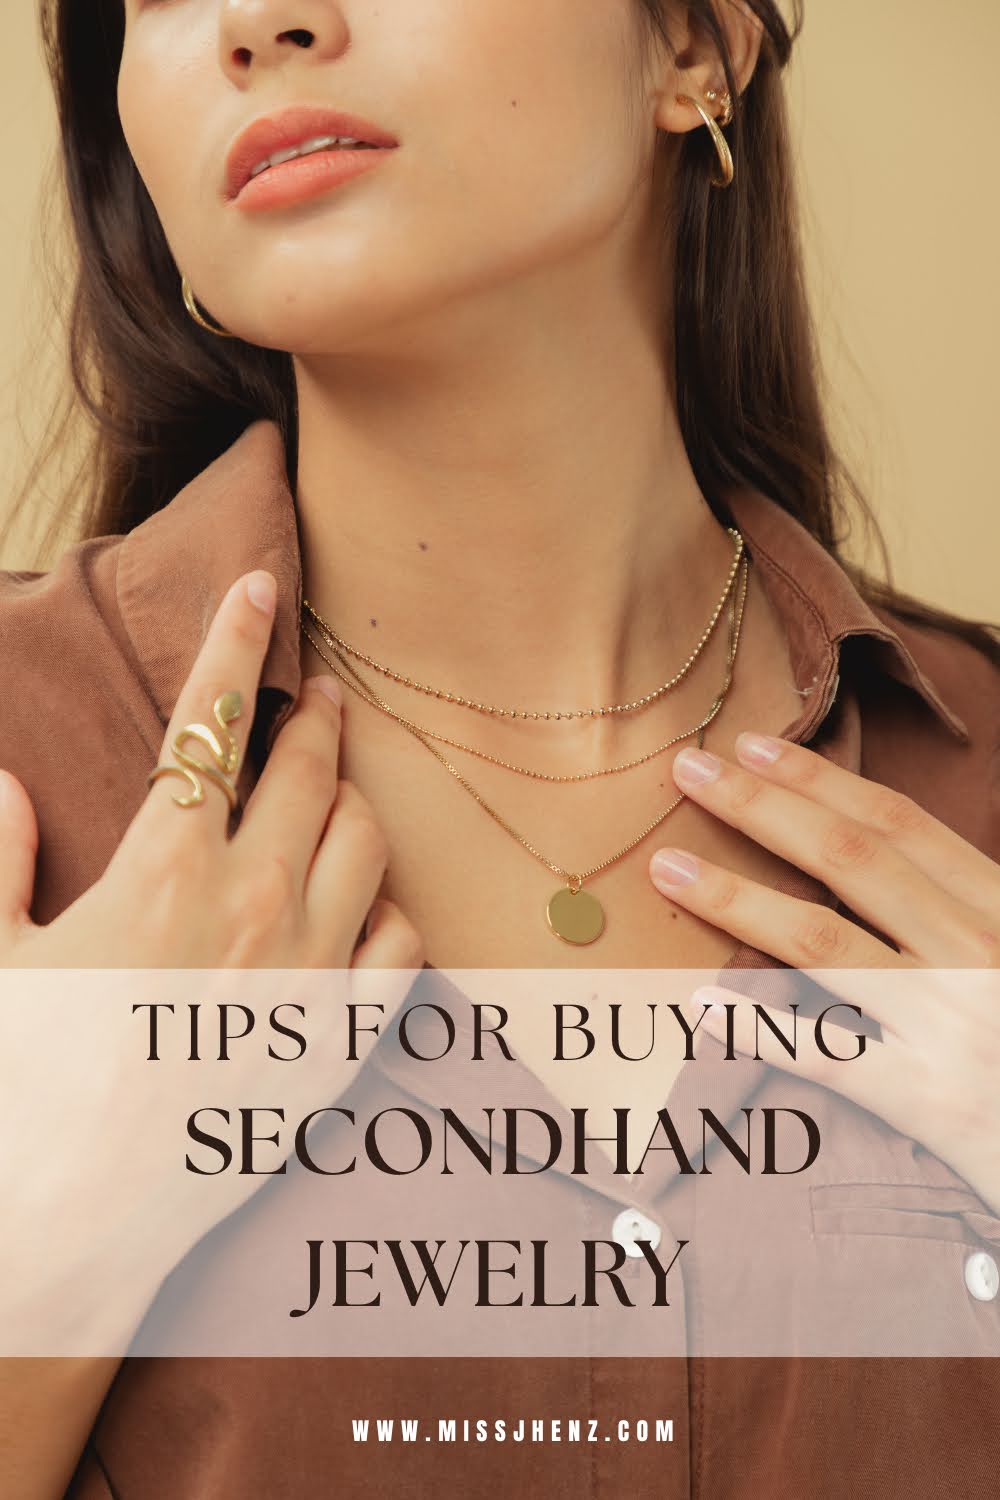 Tips for Buying Secondhand Jewelry